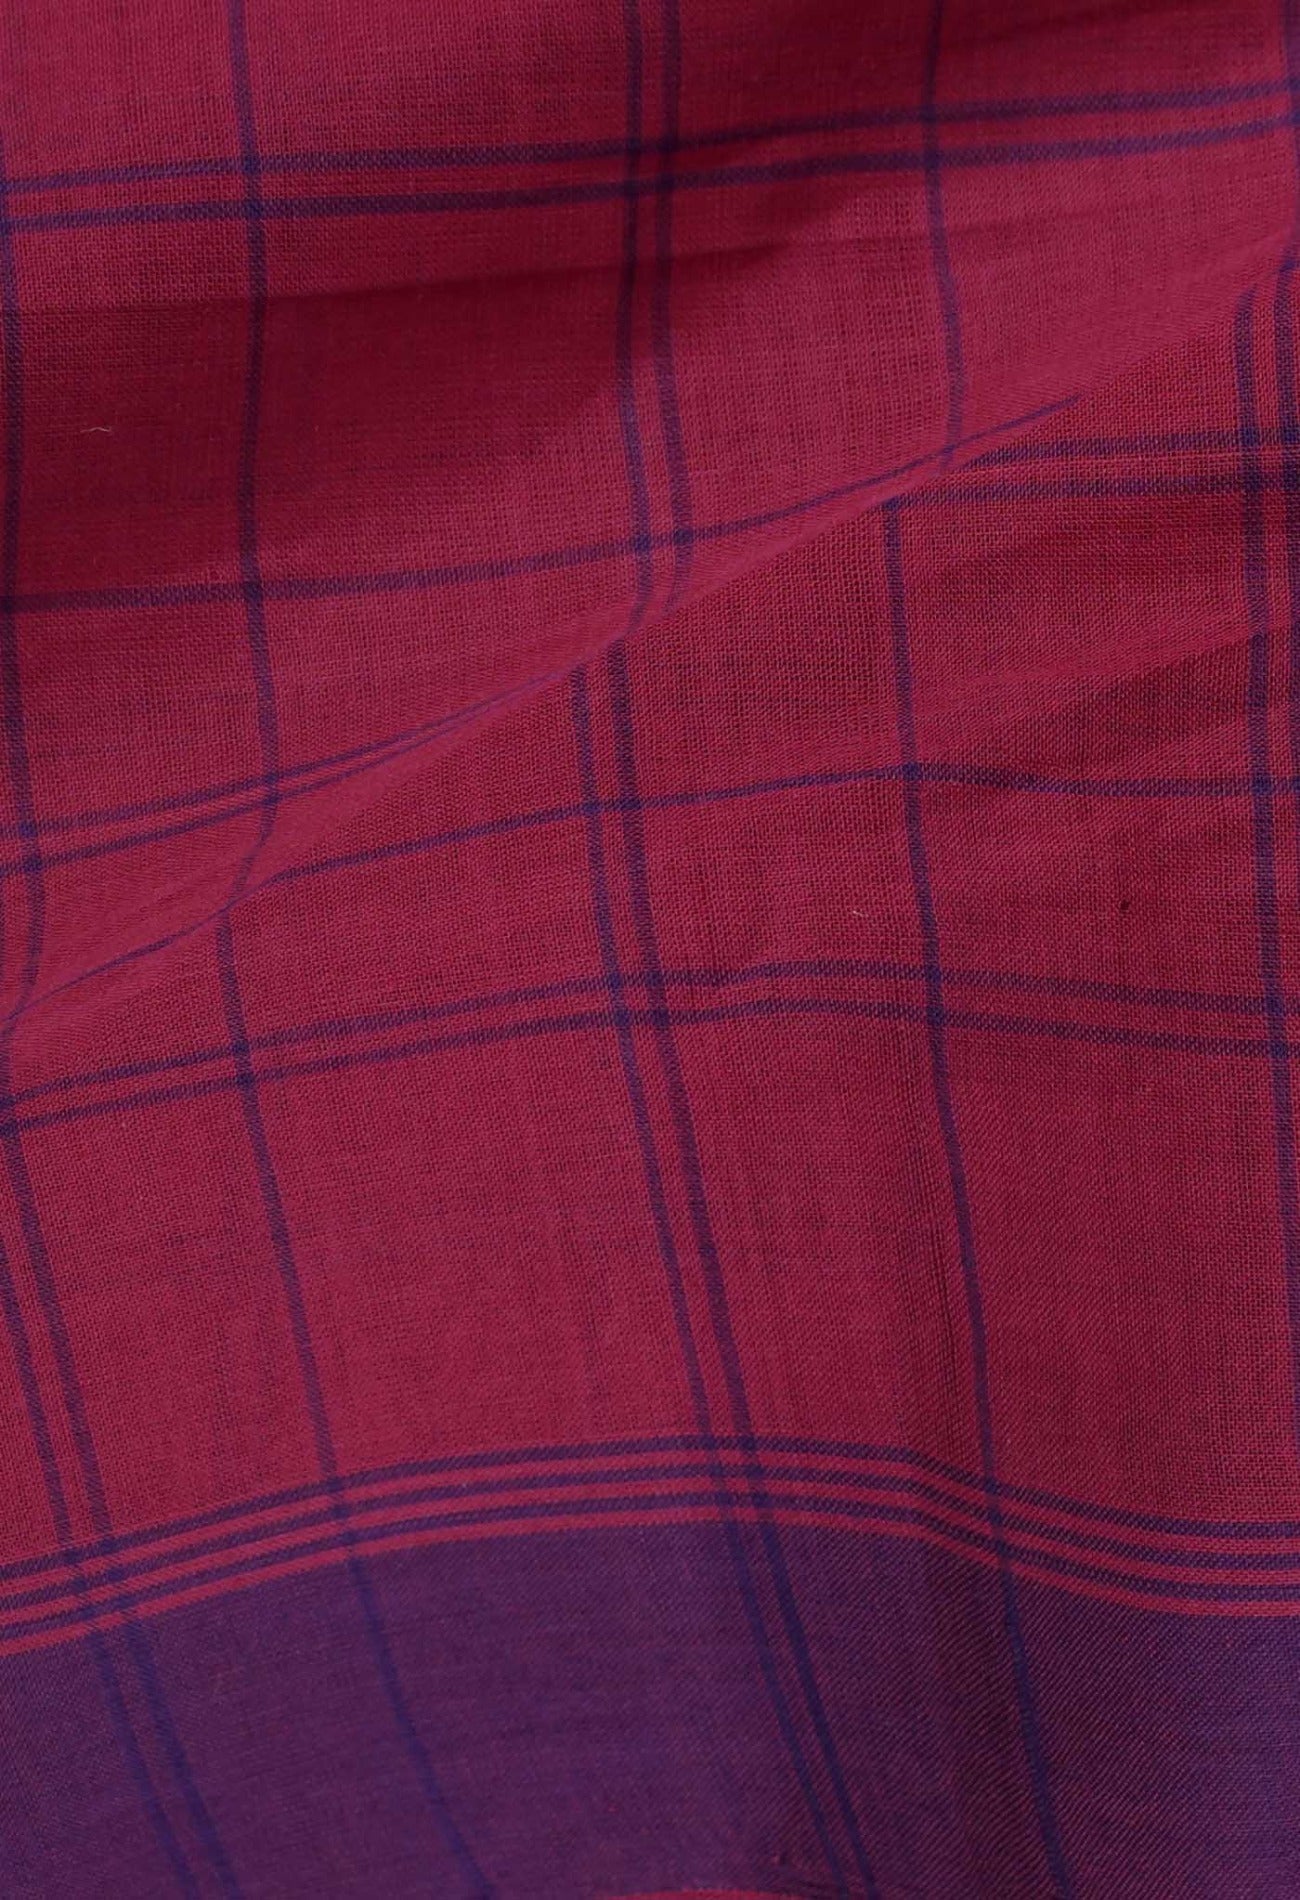 Online Shopping for Maroon Pure Handloom Andhra  Cotton Saree with Weaving from Andhra Pradesh at Unnatisilks.com India
